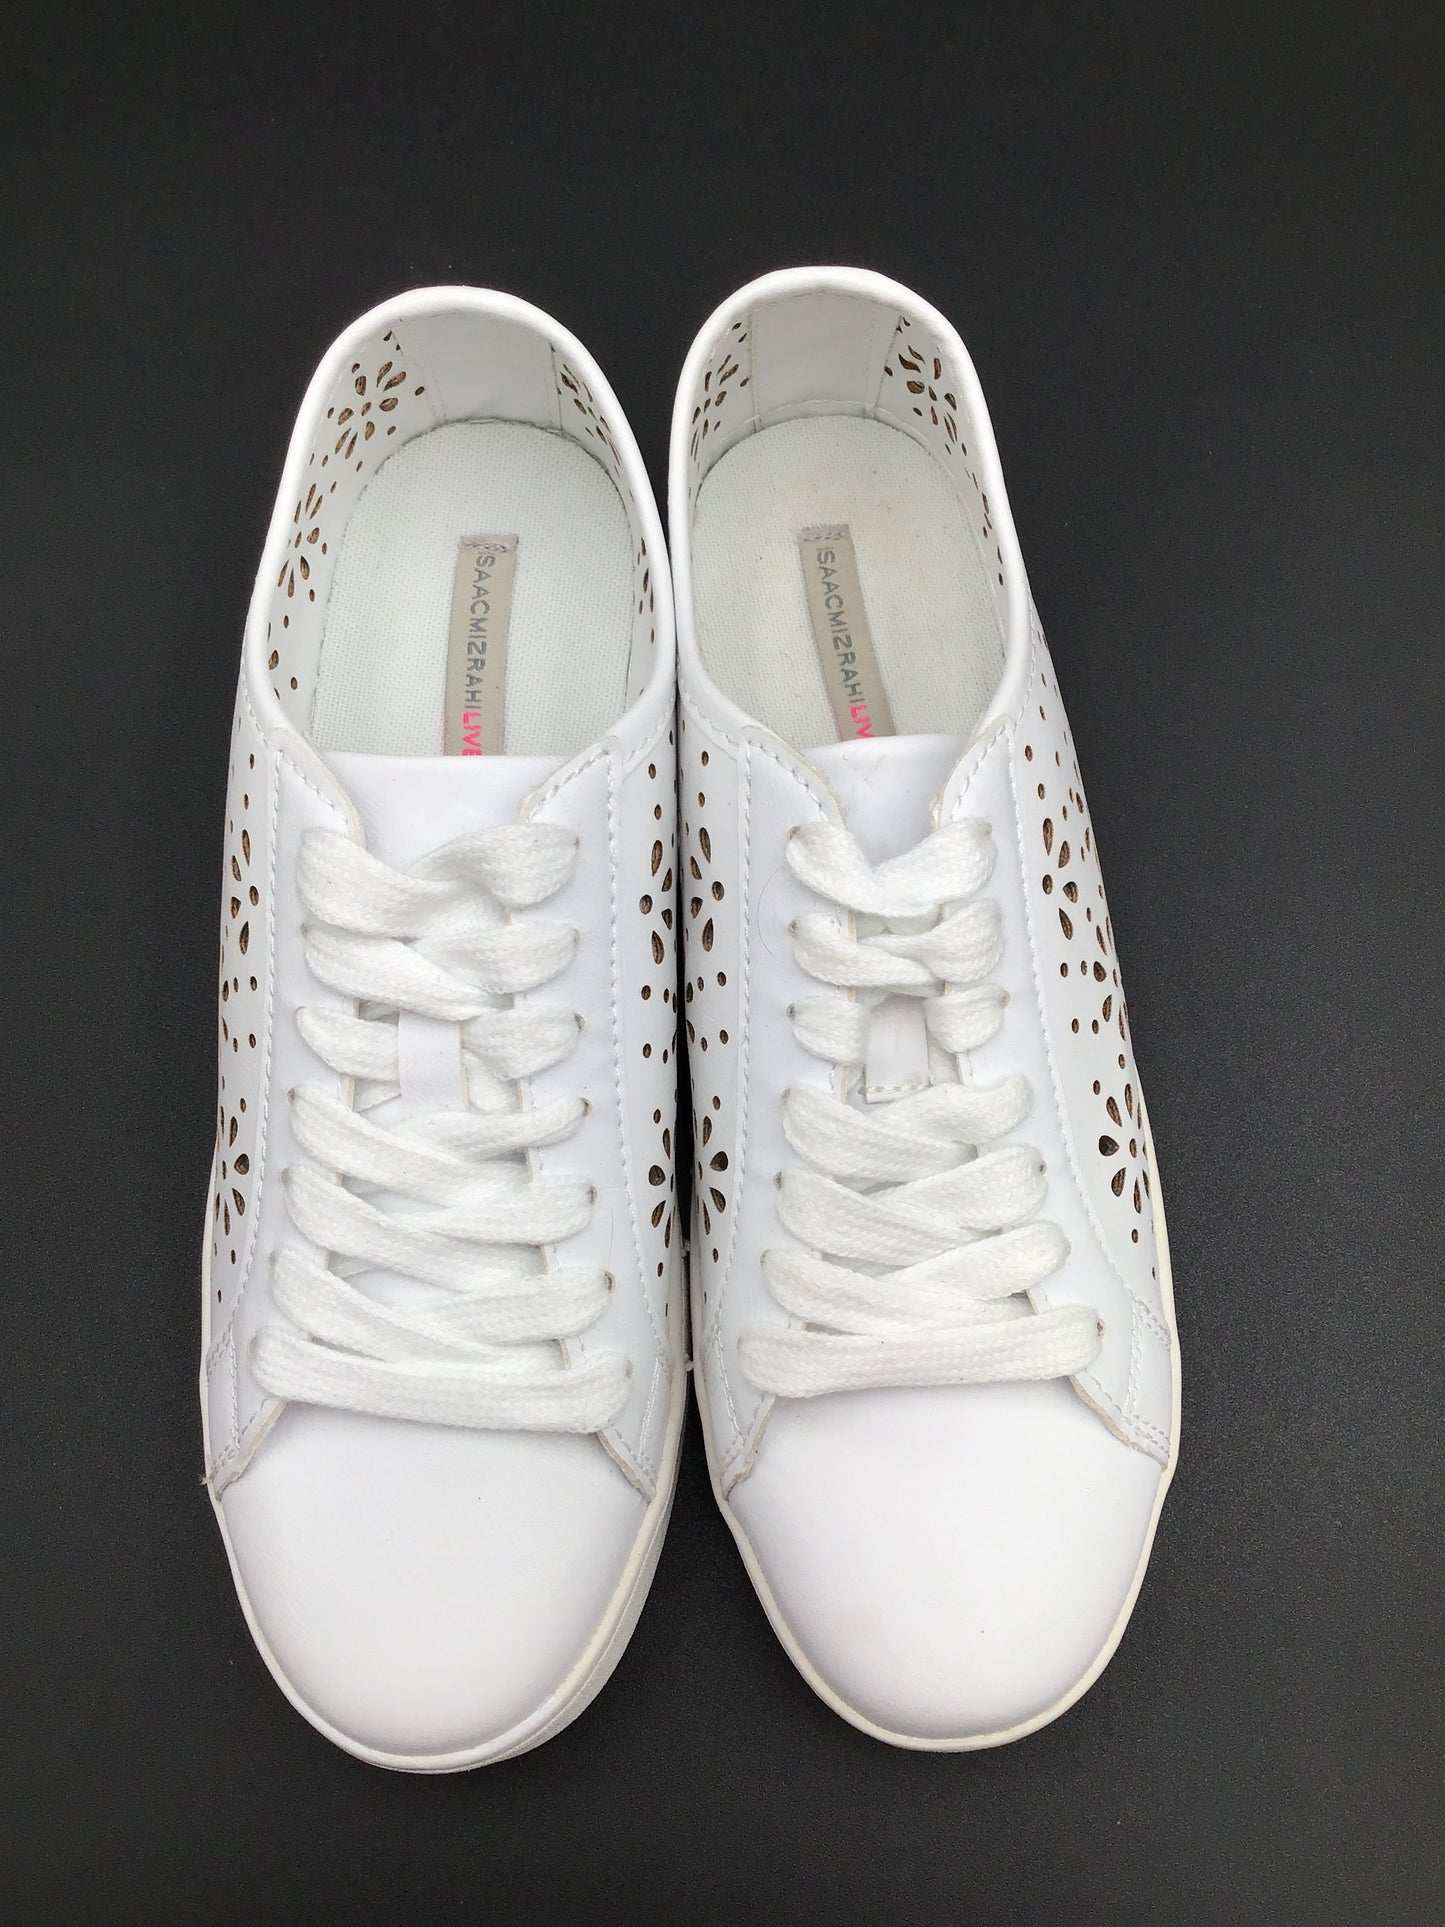 White Shoes Sneakers Isaac Mizrahi Live Qvc, Size 7.5